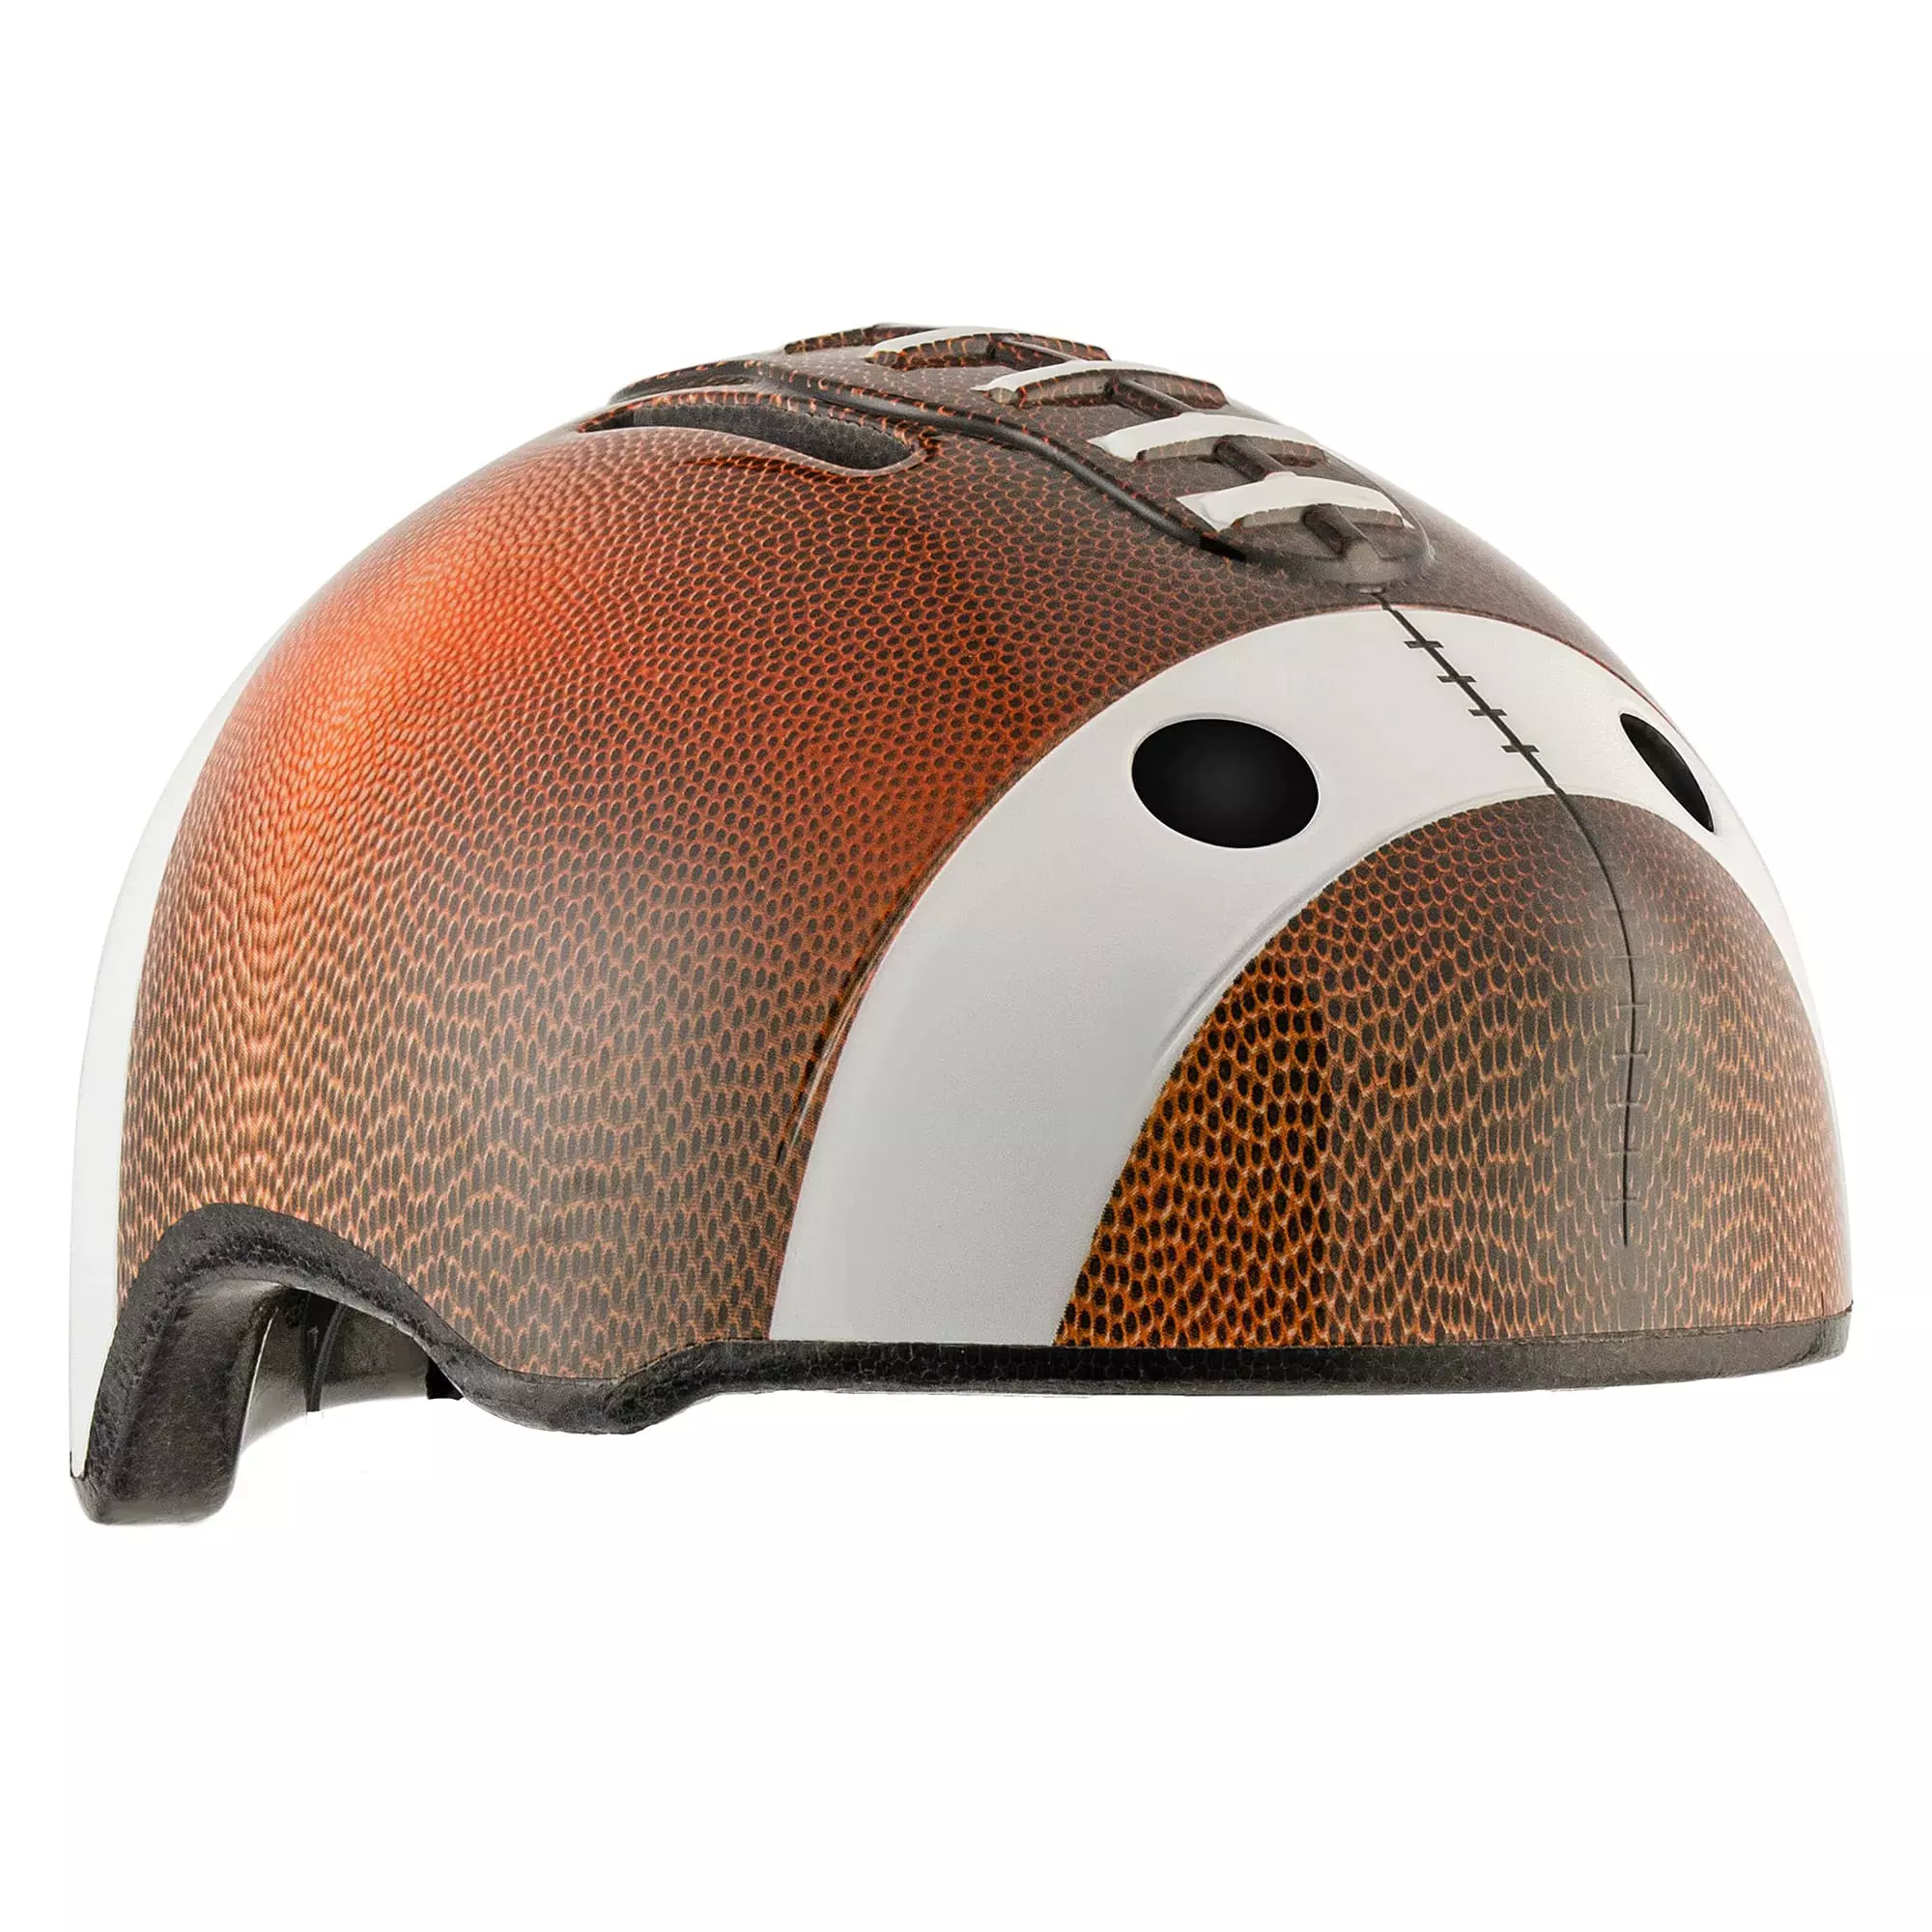 Crazy Safety Football Bicycle Helmet Brown